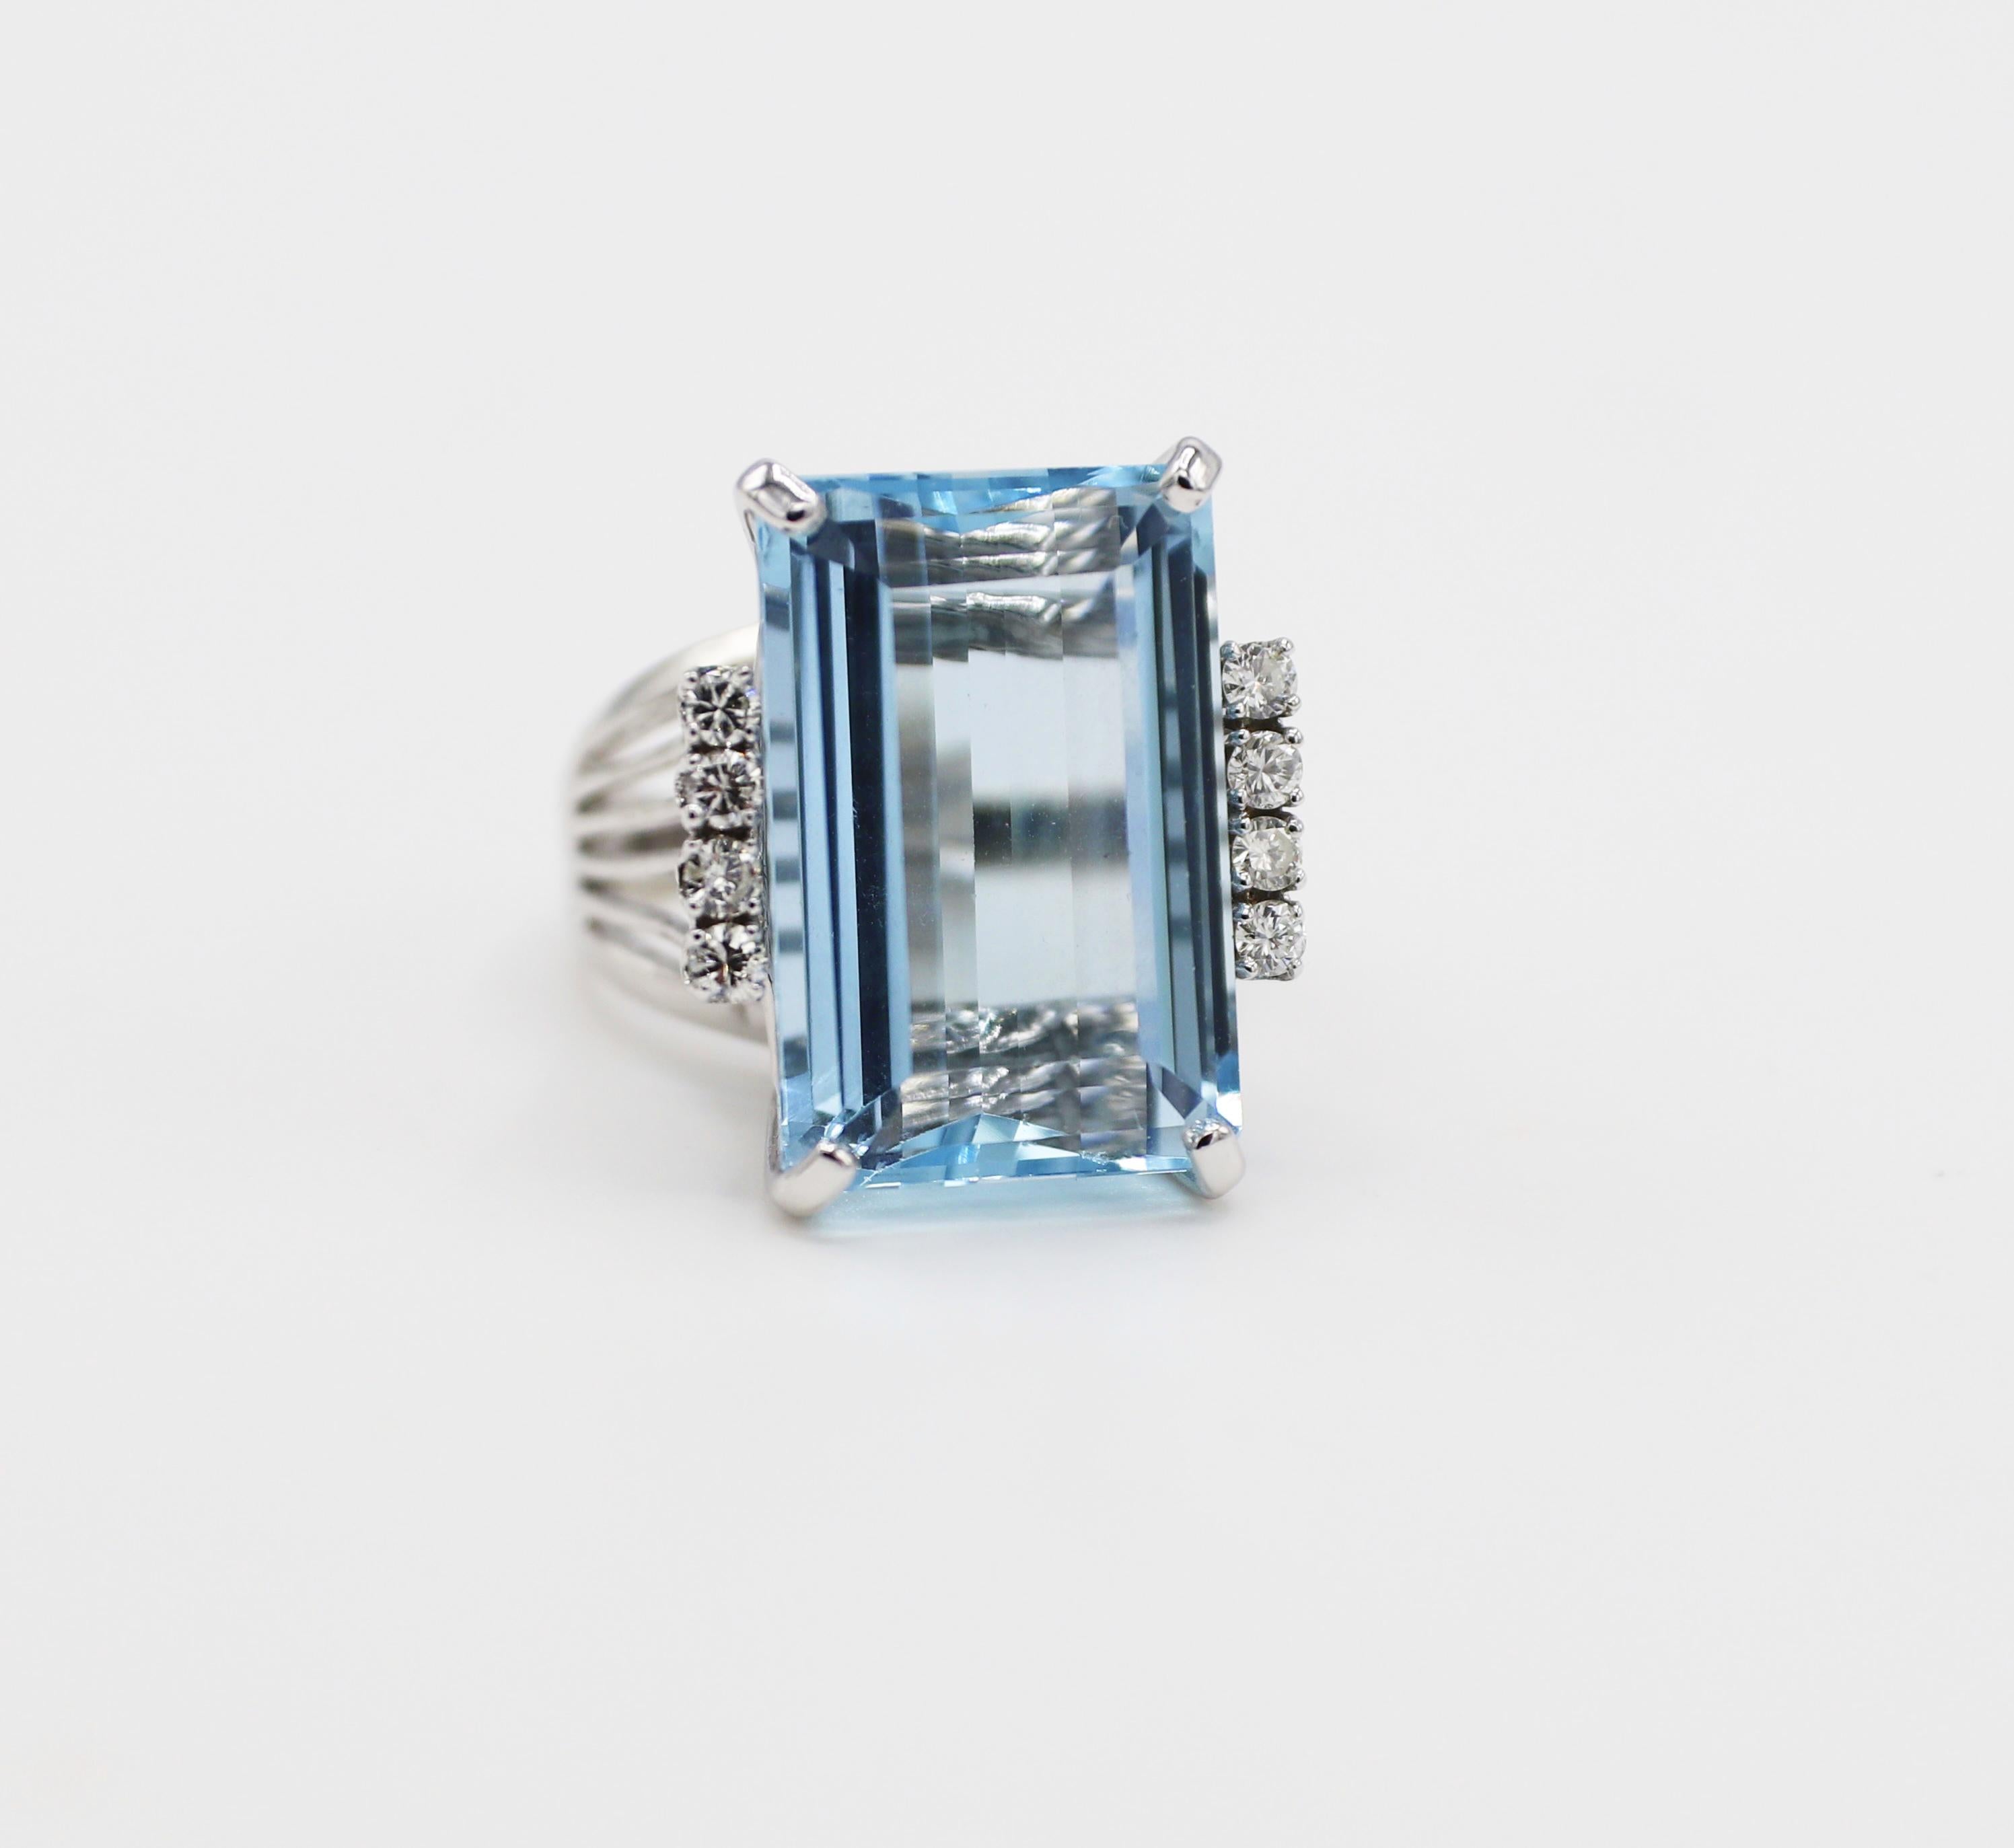 14 Karat White Gold Aquamarine & Diamond Cocktail Ring Size 5.5
Metal: 14k white gold
Weight: 9.76 grams
Aqua: 19.6 x 13 x 8.5, approx. 15.2 carats 
Diamonds: Approx. .30 CTW G VS
Top of ring measures: 21 x 17.6 MM
Height: 11.5MM
Size: 5.5 (US)
